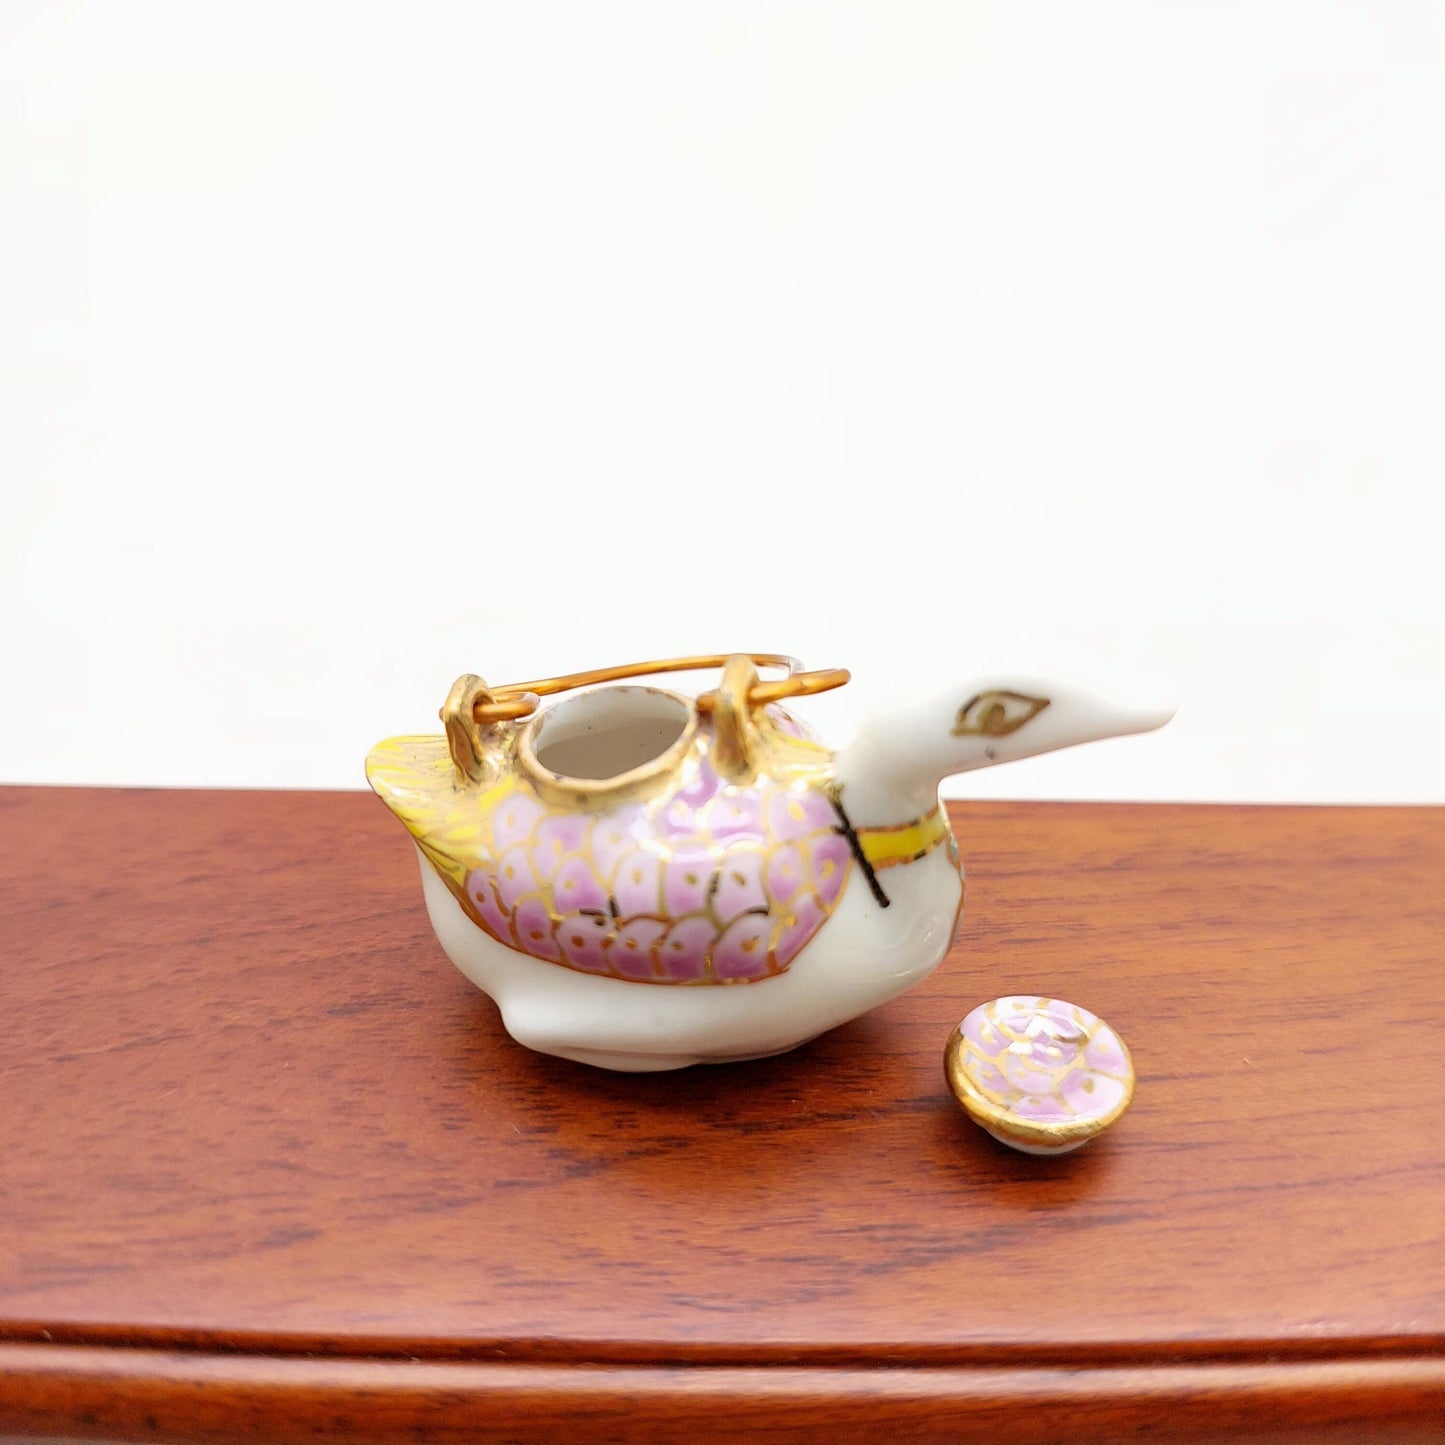 Ceramic Porcelain Miniature Duck Shaped Teapot with Copper Handle, Benjarong patterns Golden Dots, Dollhouse Decor, Gift for Teapot Lovers